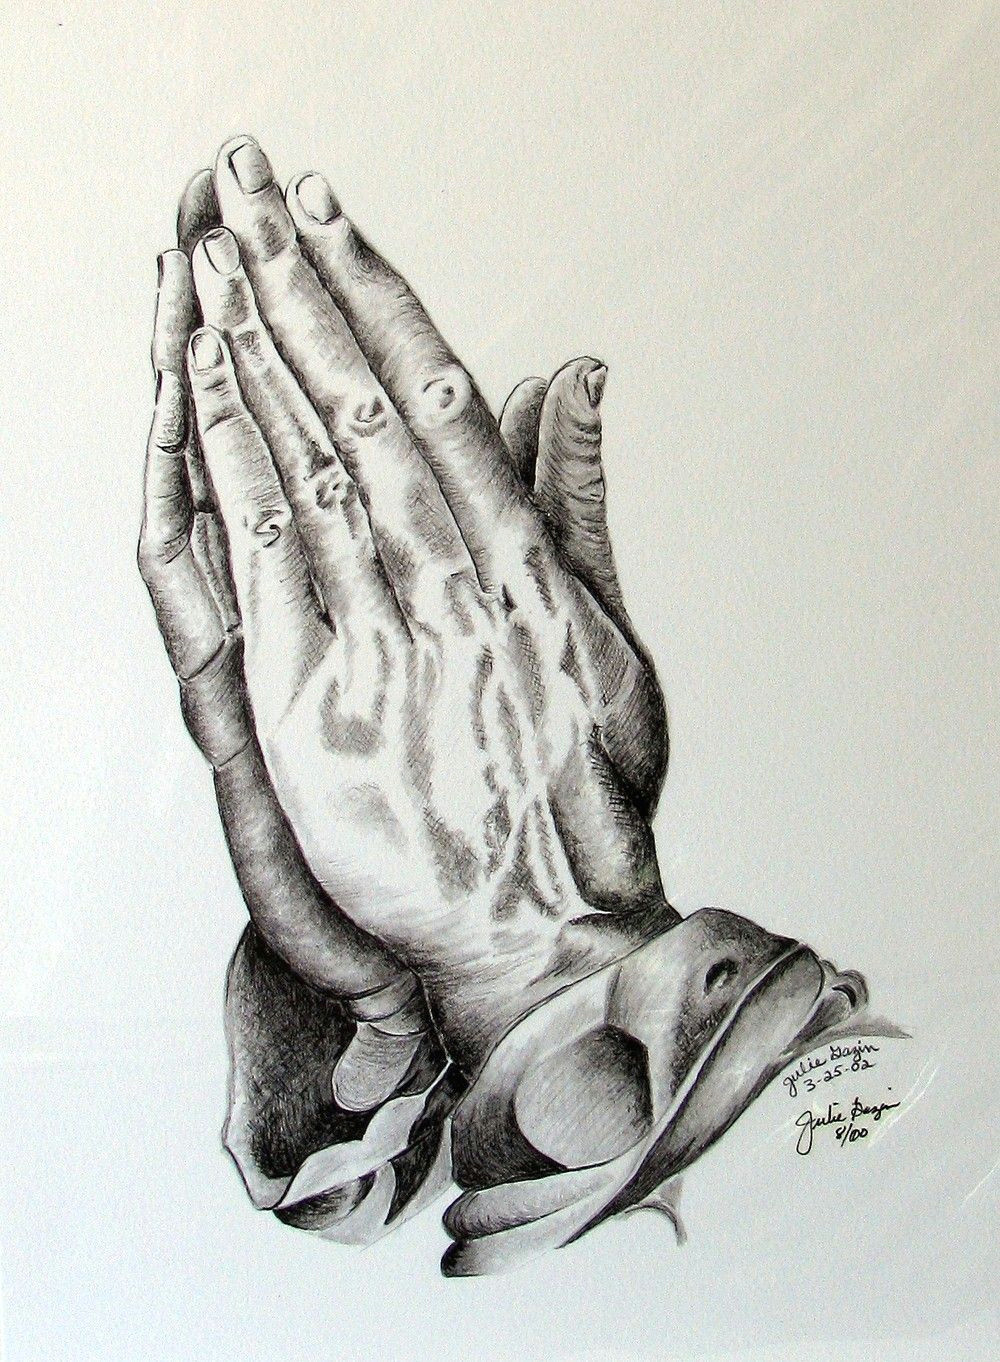 Drawings Of Hands In Prayer Pix for Jesus Praying Hands Drawing Pen and Paper Pinterest